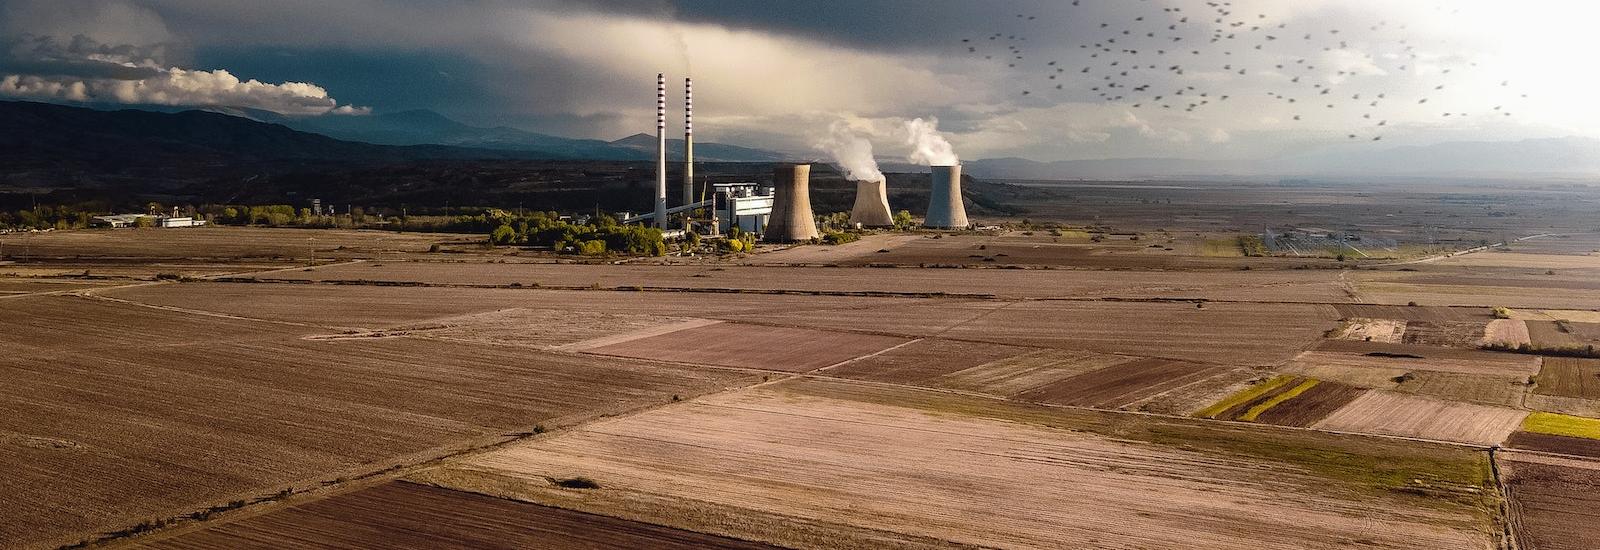 landscape image of bare farmland with brown shades of earth and a nuclear power plant with 3 stacks at a distance with mountains and dark and light clouds and sky with a flock of birds flying and a tree line and buildings around the plant